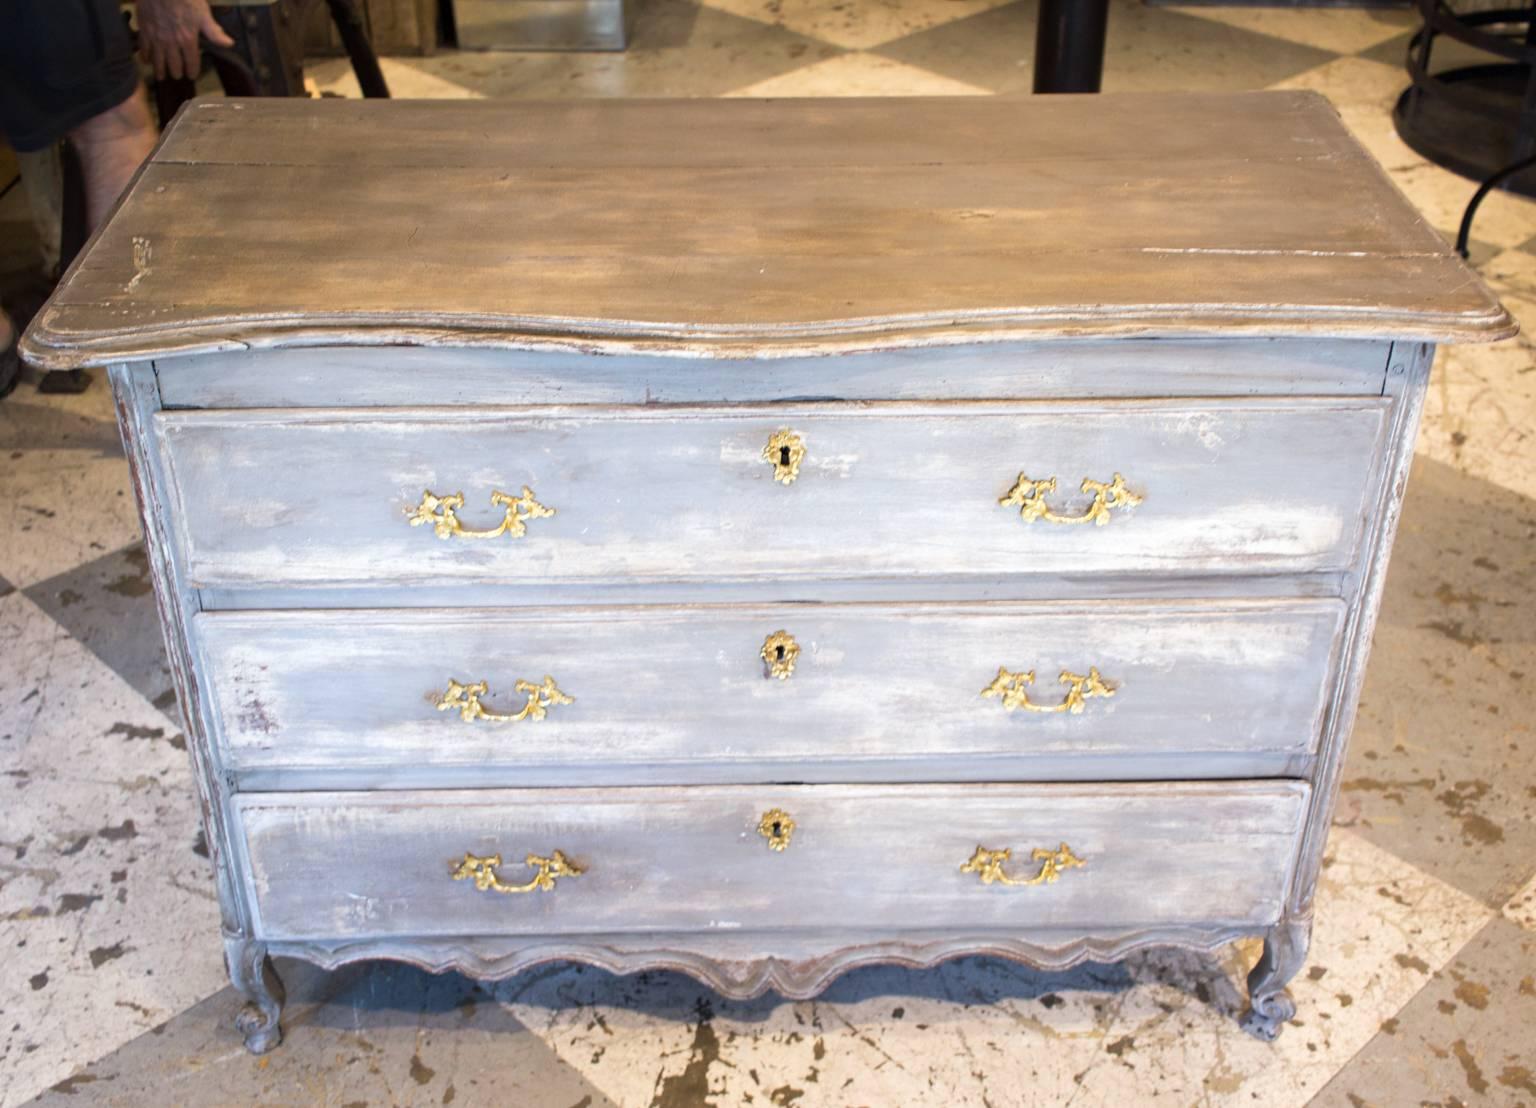 This distressed-finish chest of drawers was recently discovered in France. With three drawers, there is plenty of room for storage in this charming piece. The brass hardware looks to be original, but could easily be changed for a different finish.